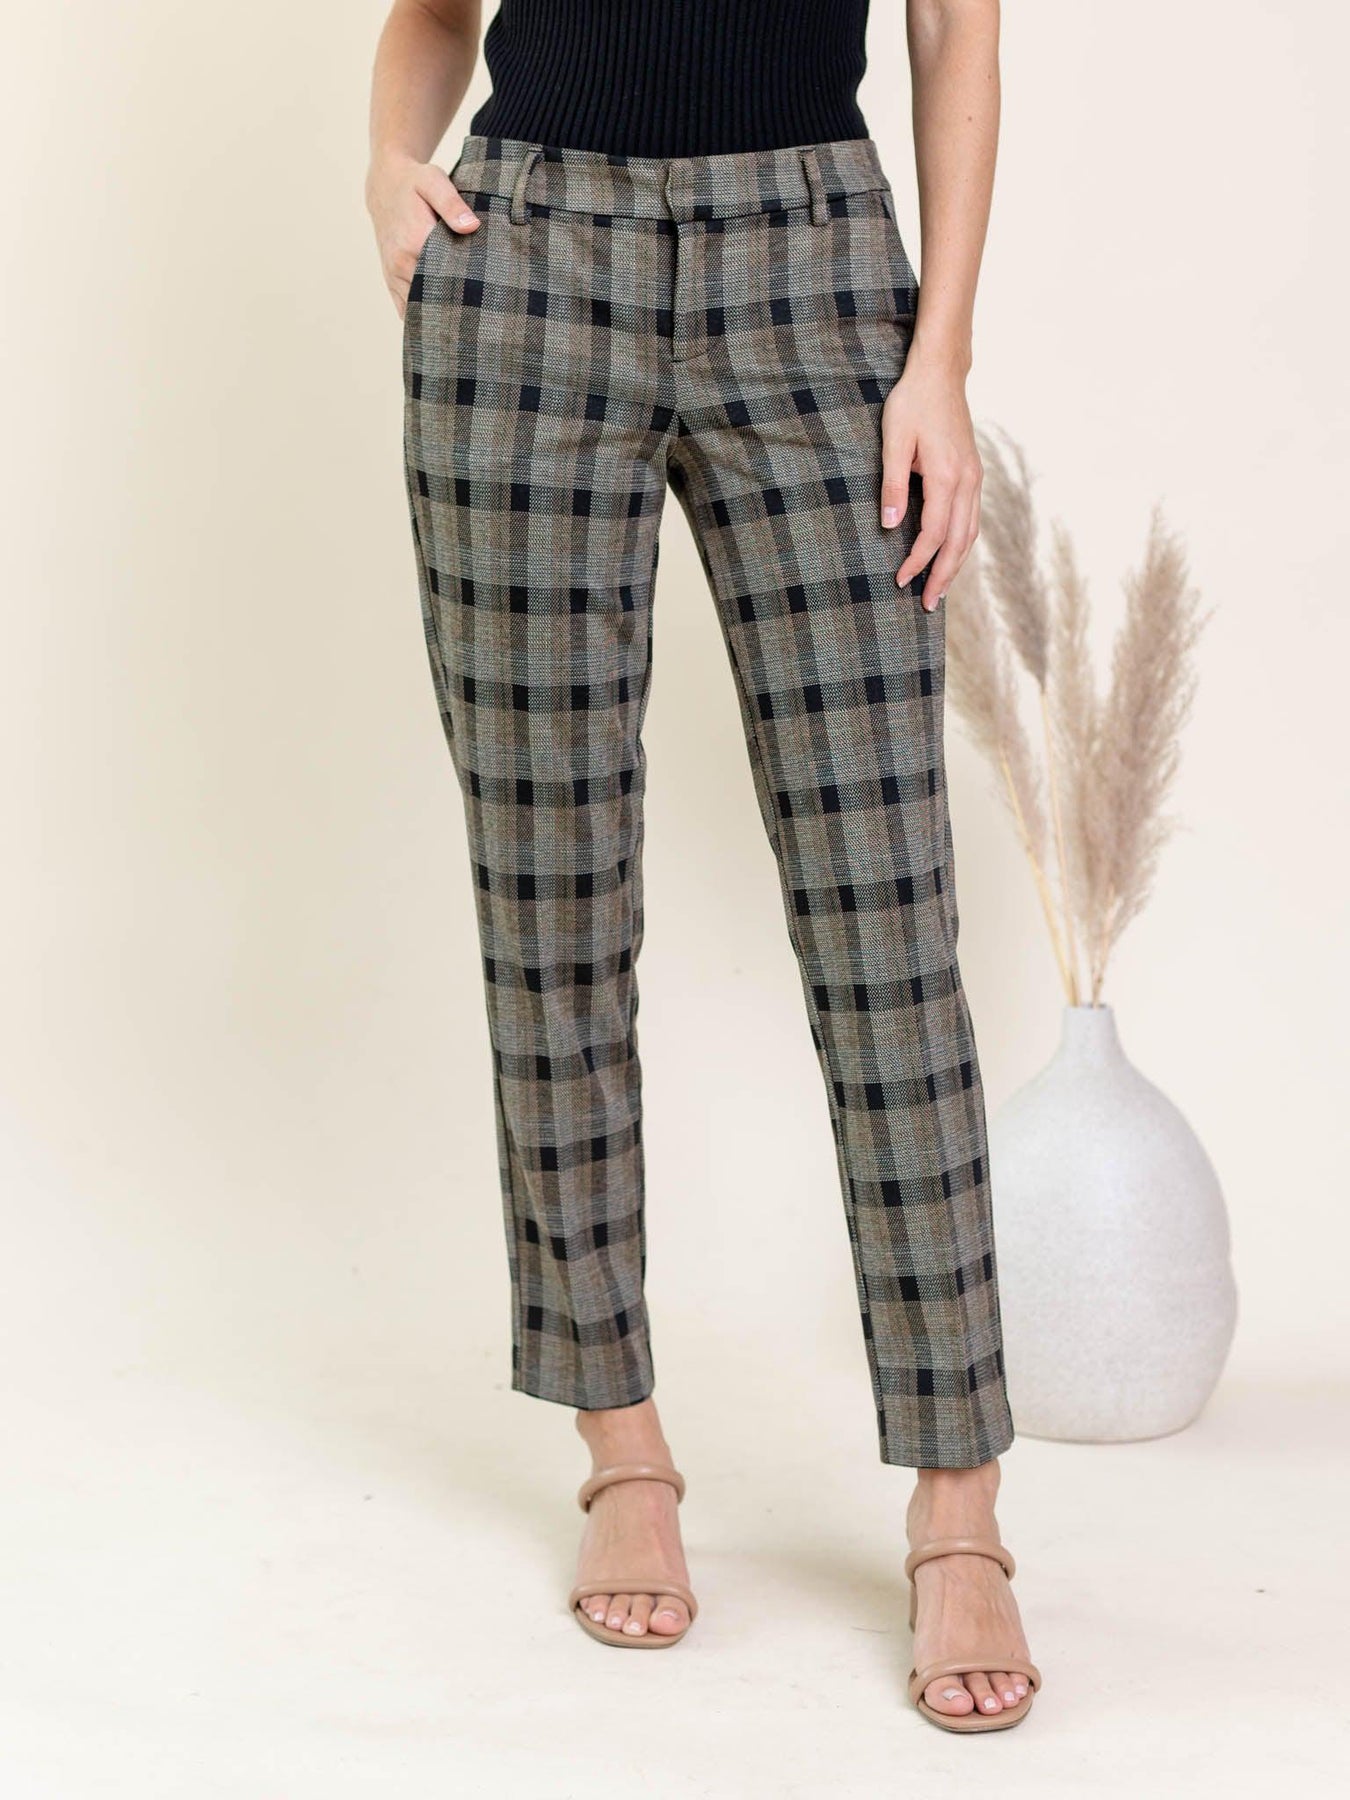 Light Before Dark Tie Front Grey Checked Trousers | Trousers women outfit, Checked  trousers outfit, Clothes